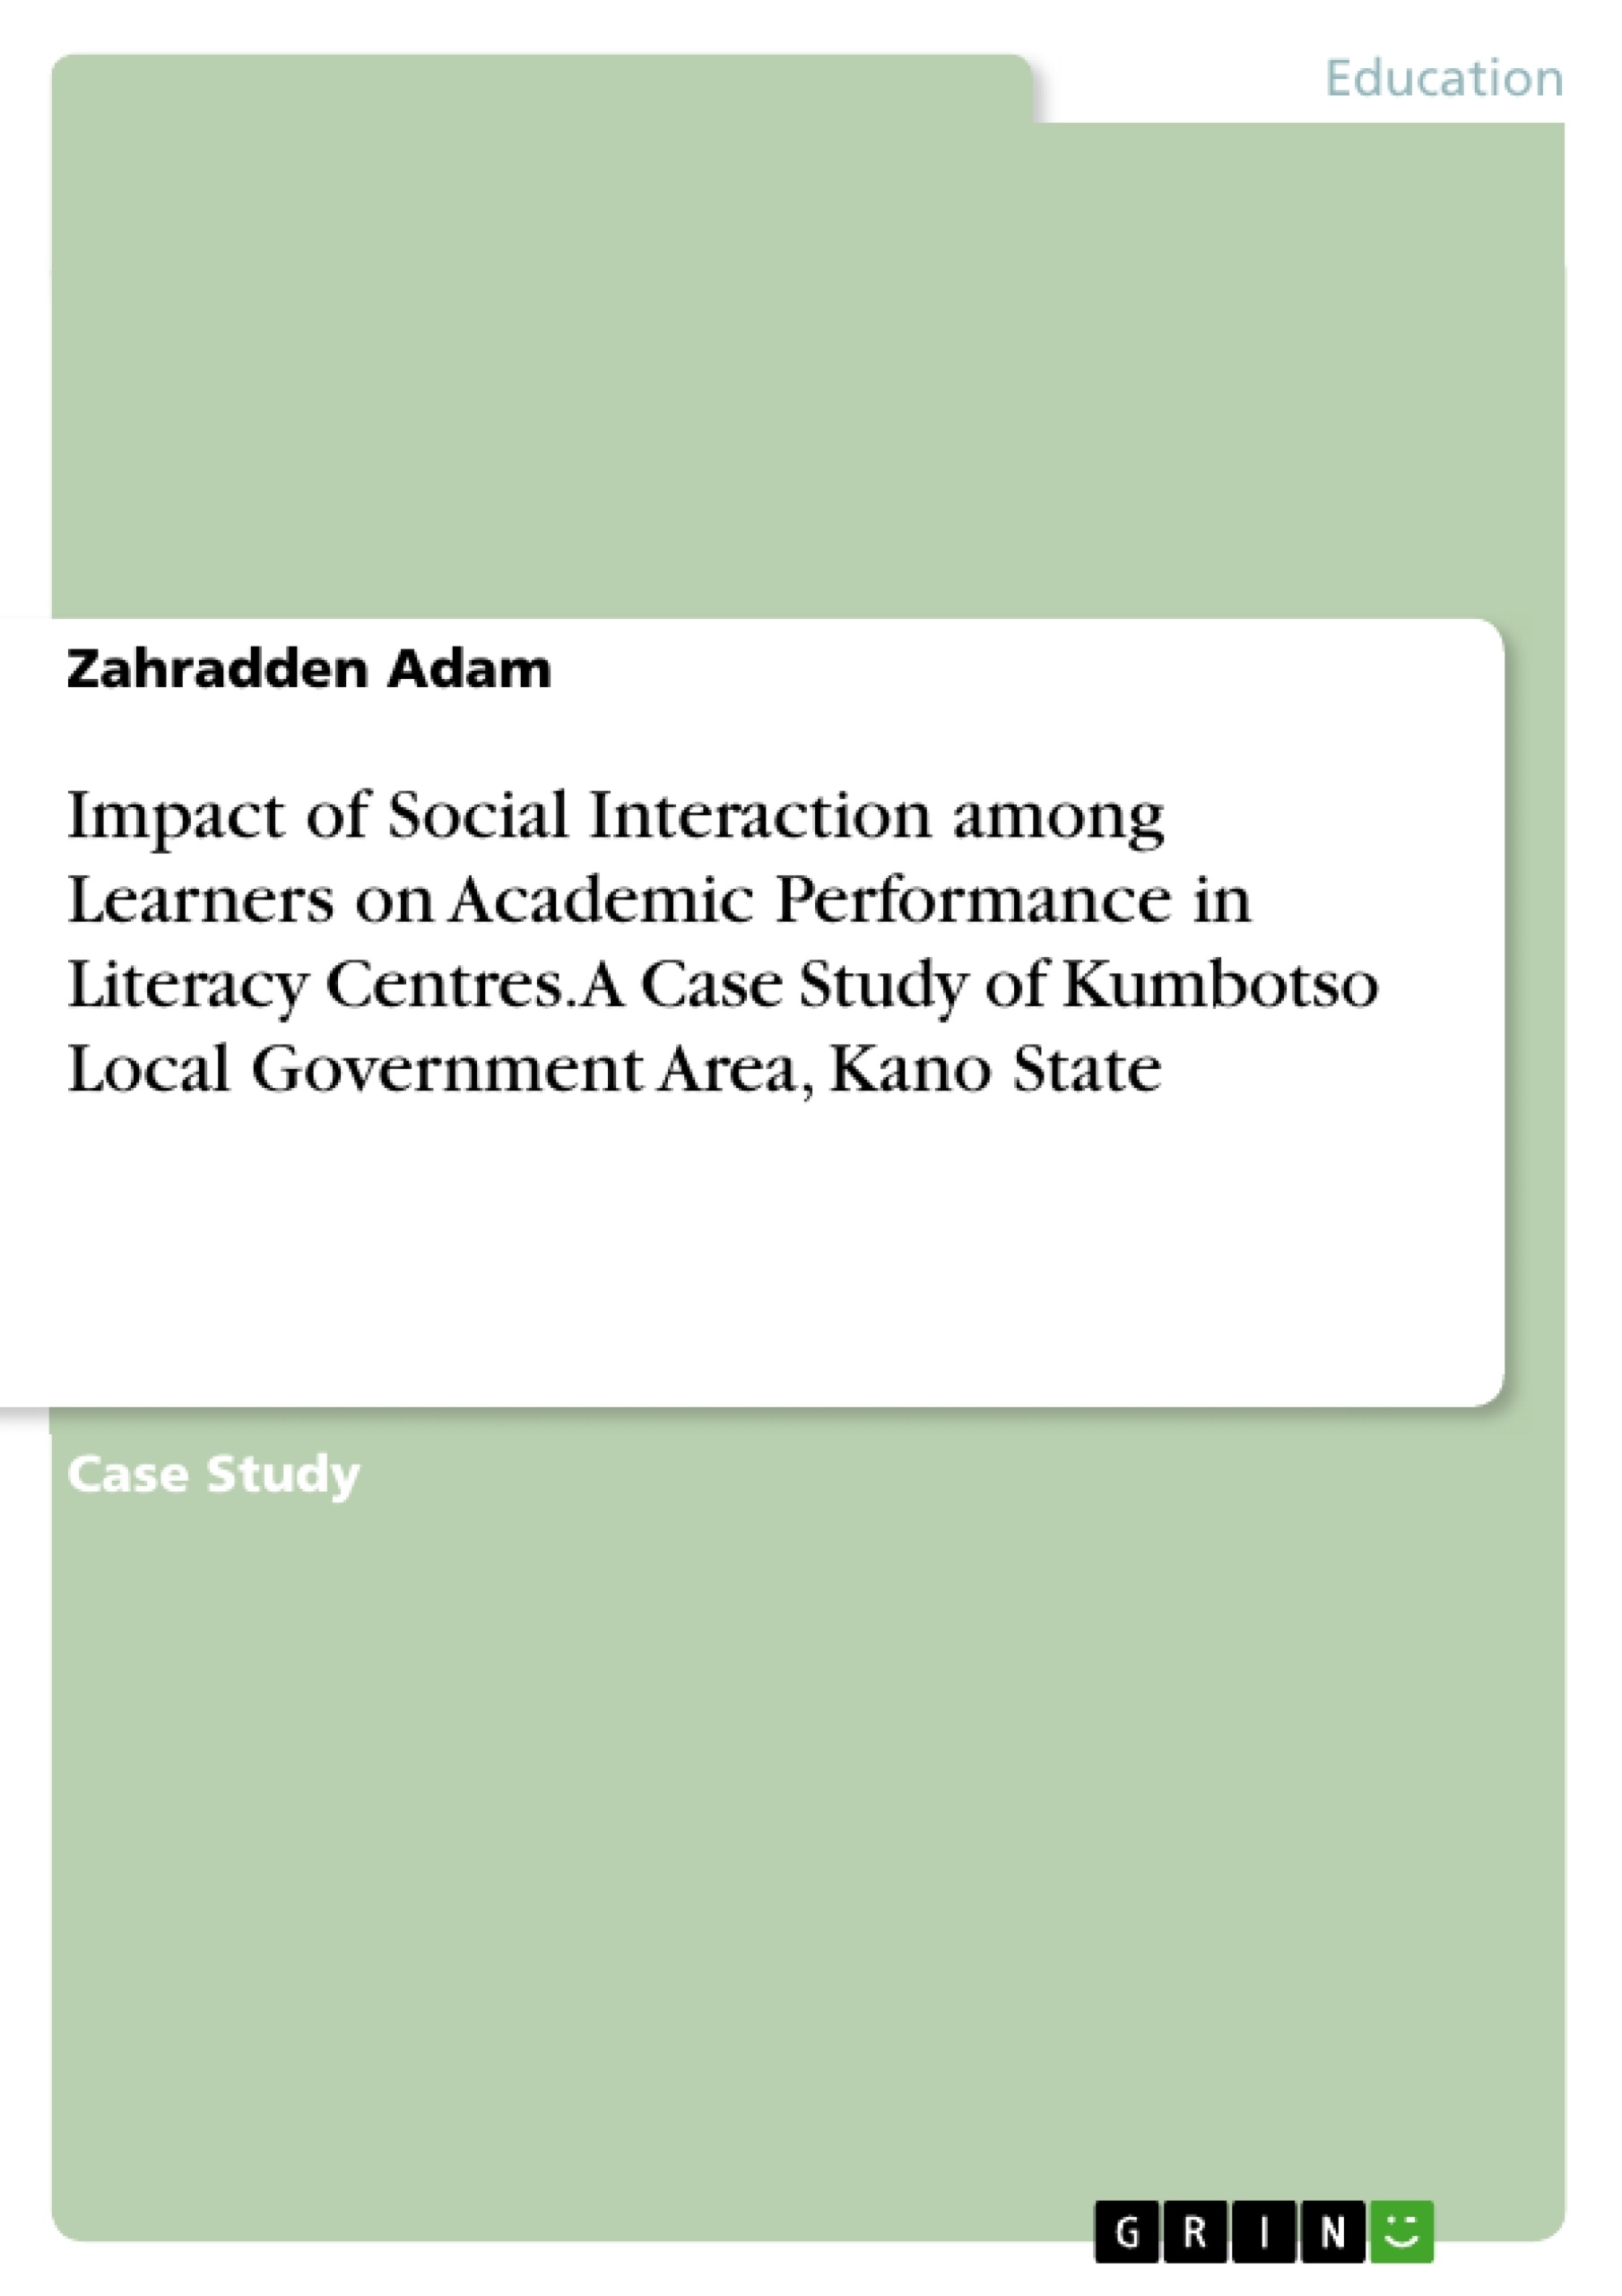 Title: Impact of Social Interaction among Learners on Academic Performance in Literacy Centres. A Case Study of Kumbotso Local Government Area, Kano State